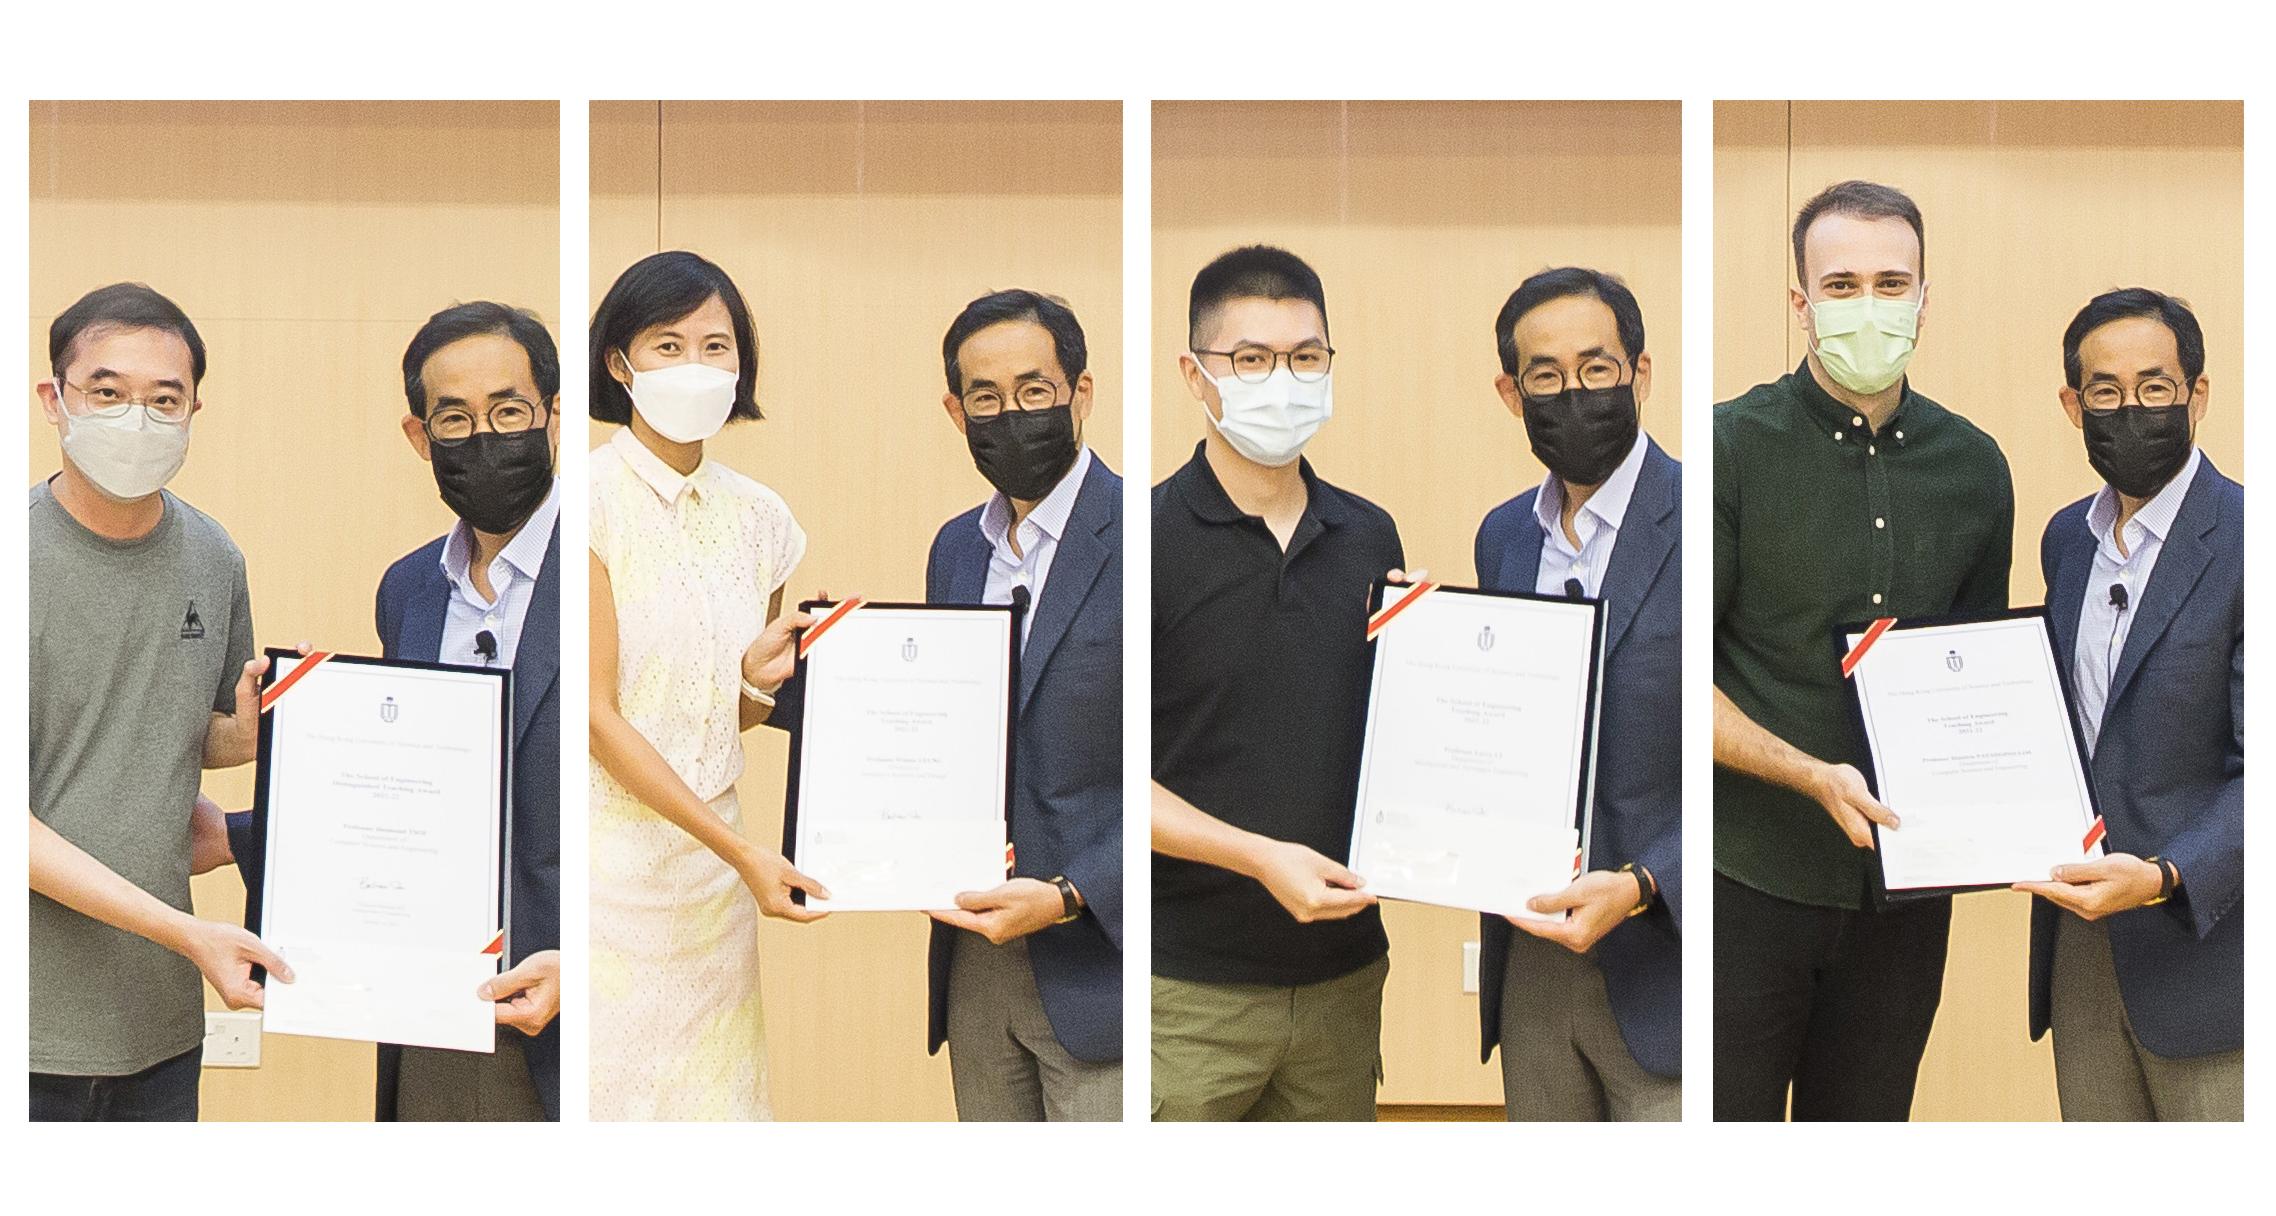 (From left) Prof. Desmond Tsoi, Prof. Winnie Leung, Prof. Larry Li, and Prof. Dimitris Papadopoulos received the SENG Teaching Excellence Appreciation Award 2021-22 from Prof. Bert Shi, Acting Dean of Engineering.